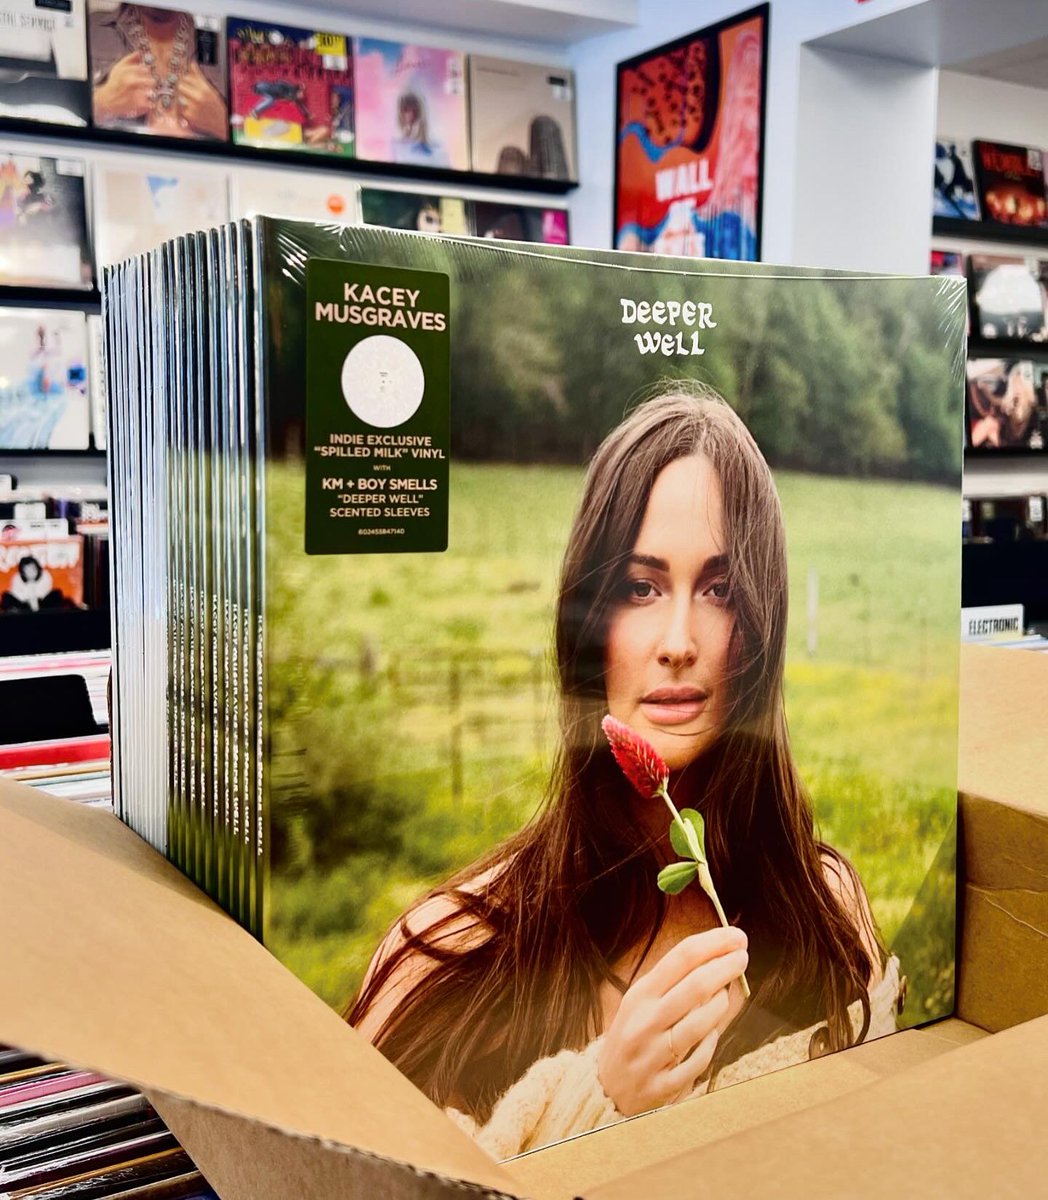 Kacey Musgraves returns this week with her new album, ‘Deeper Well’. Thanks to all the fans who’ve already pre-ordered this exclusive SPILLED MILK vinyl edition, which has scented sleeves! pop-music.ca/kacey-musgrave… #KaceyMusgraves #DeeperWell